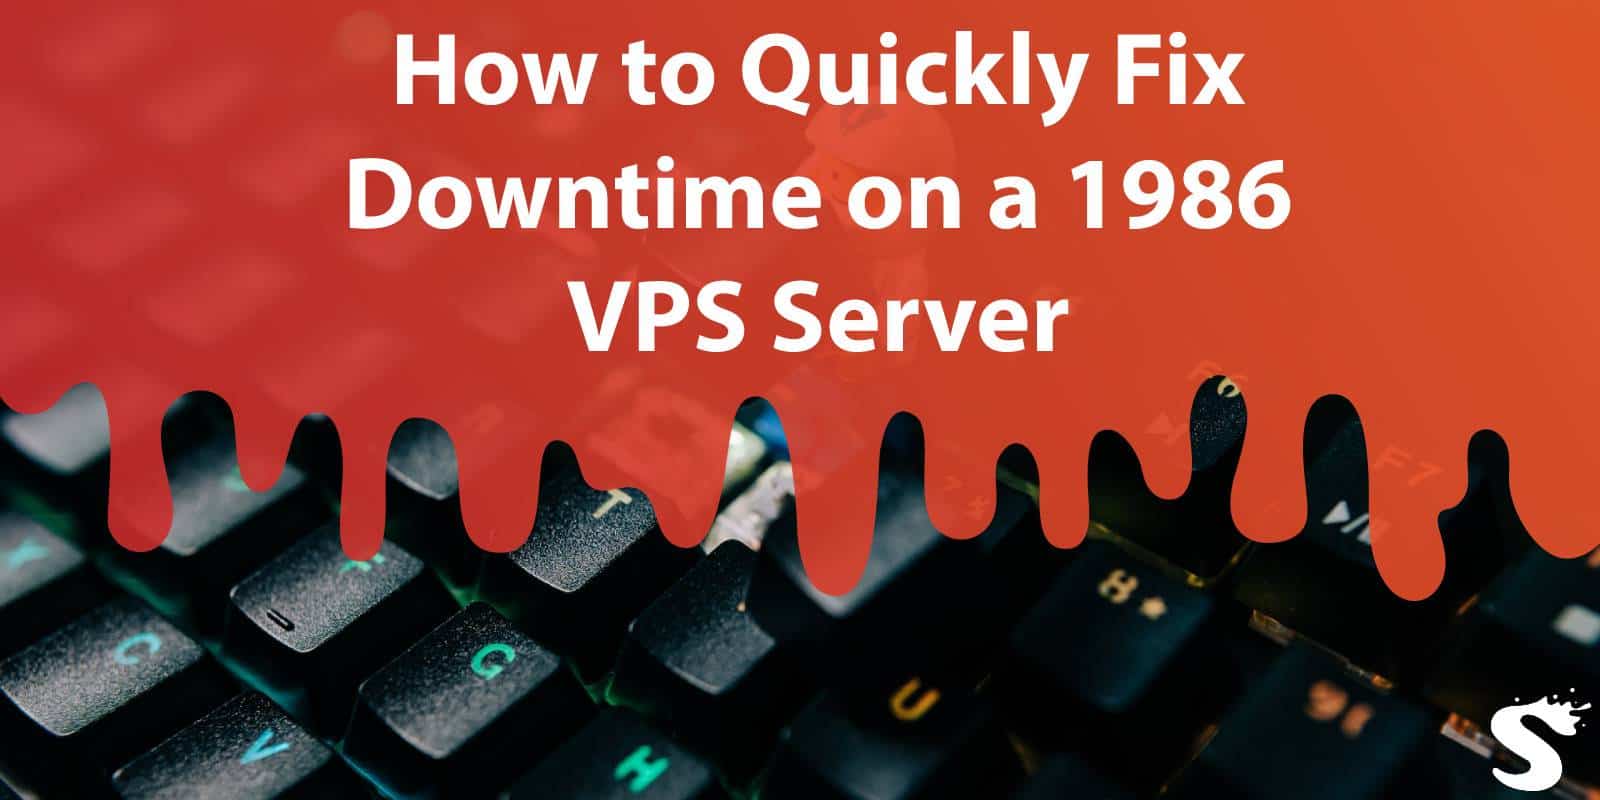 Quickly Fix Downtime On A 1986 VPS Server